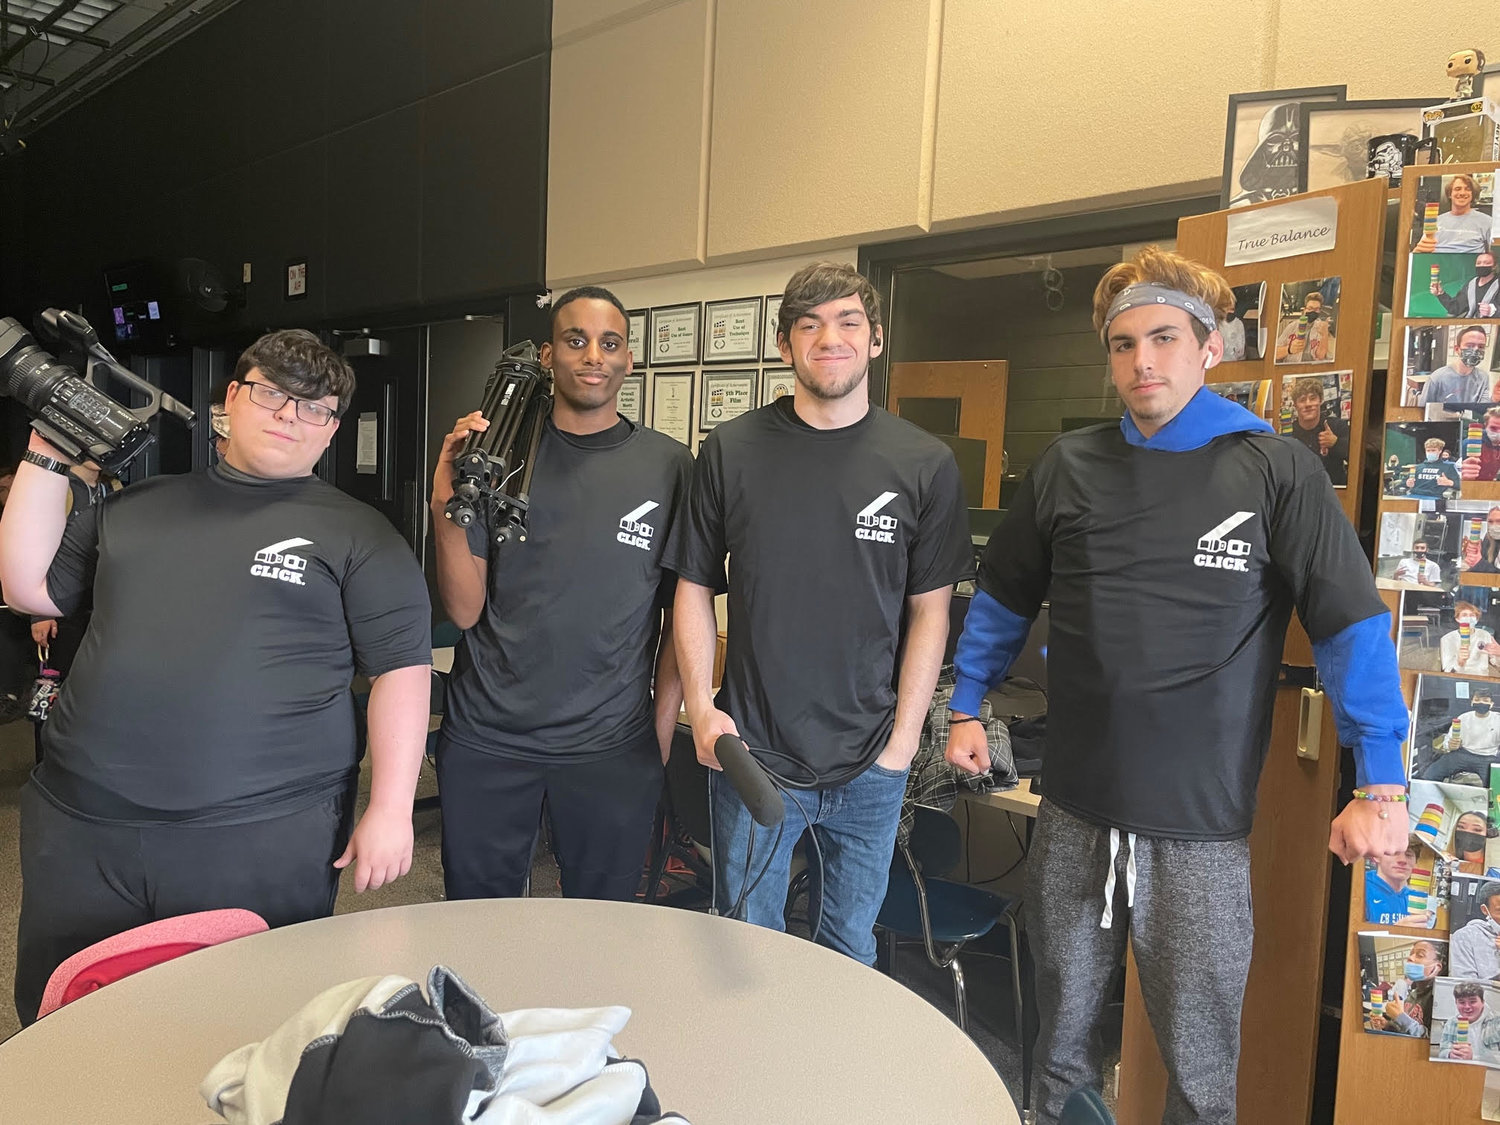 The winning video was put together by seniors John Livezey, Evan Aldridge, Will McAuley, and Jake Martin under the direction of media production teacher Jayne Weiss.